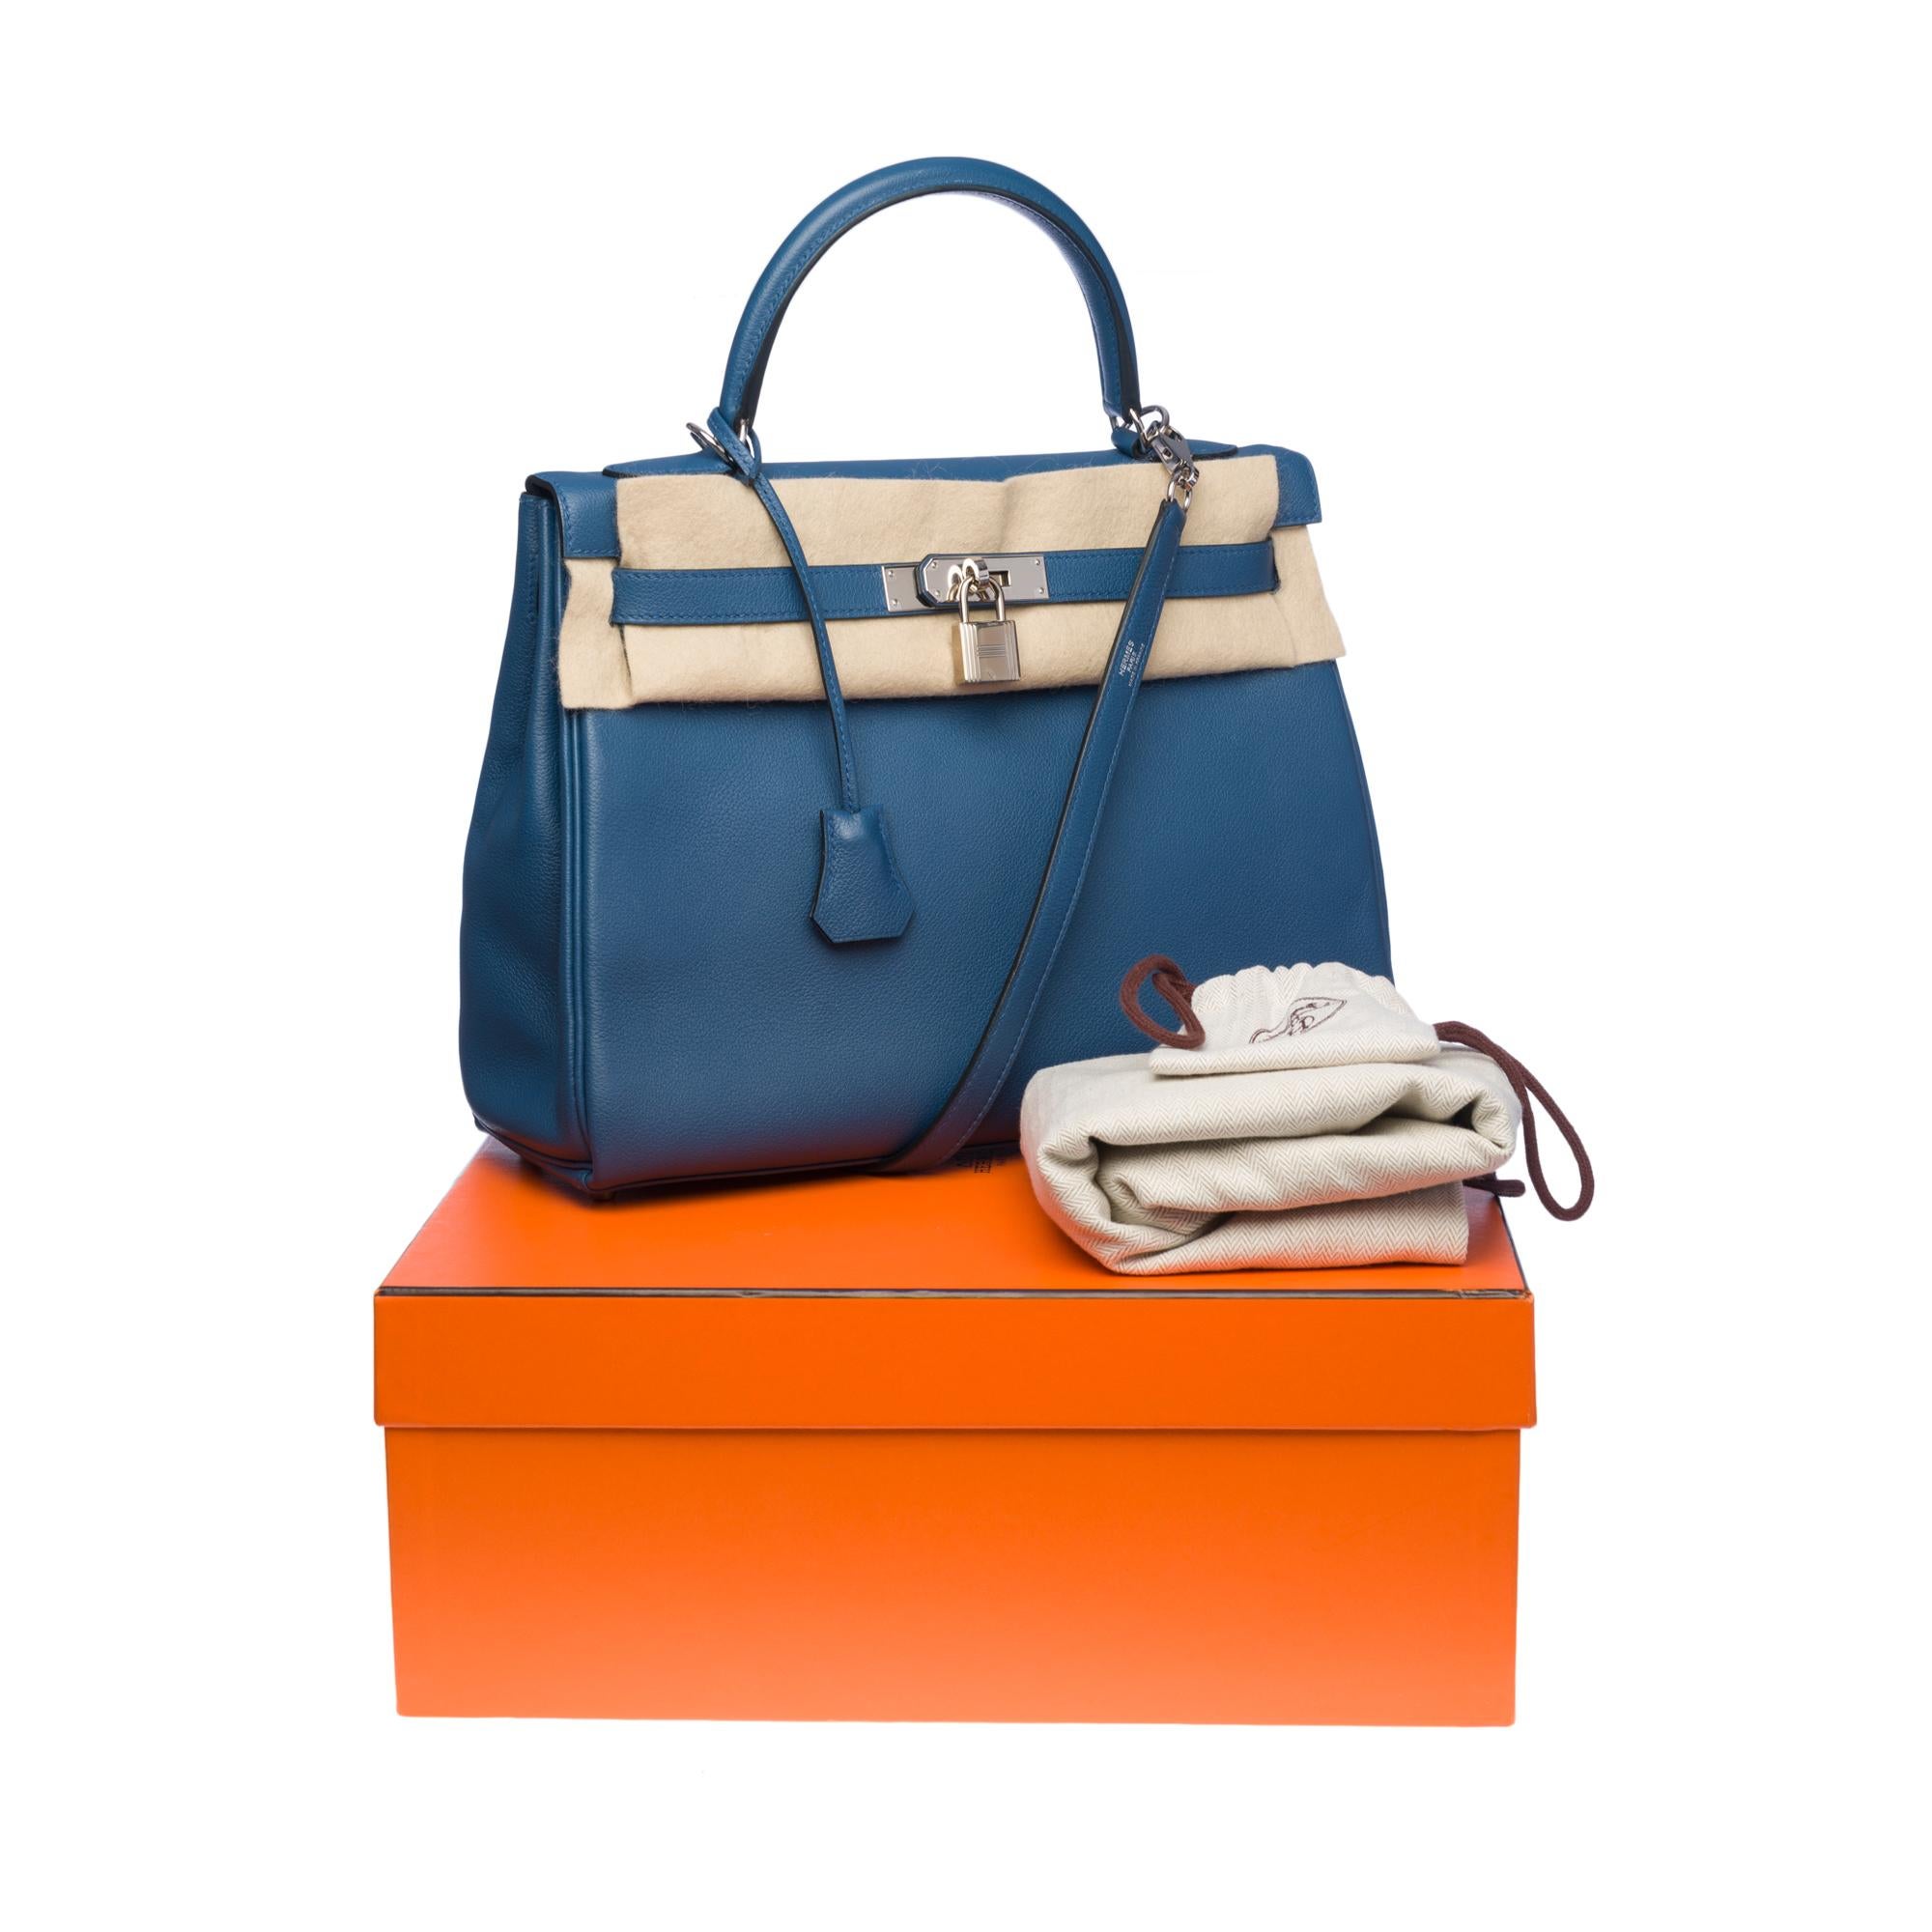 Hermès Kelly 32cm handbag with strap in Evercolor blue Agate leather, SHW 6